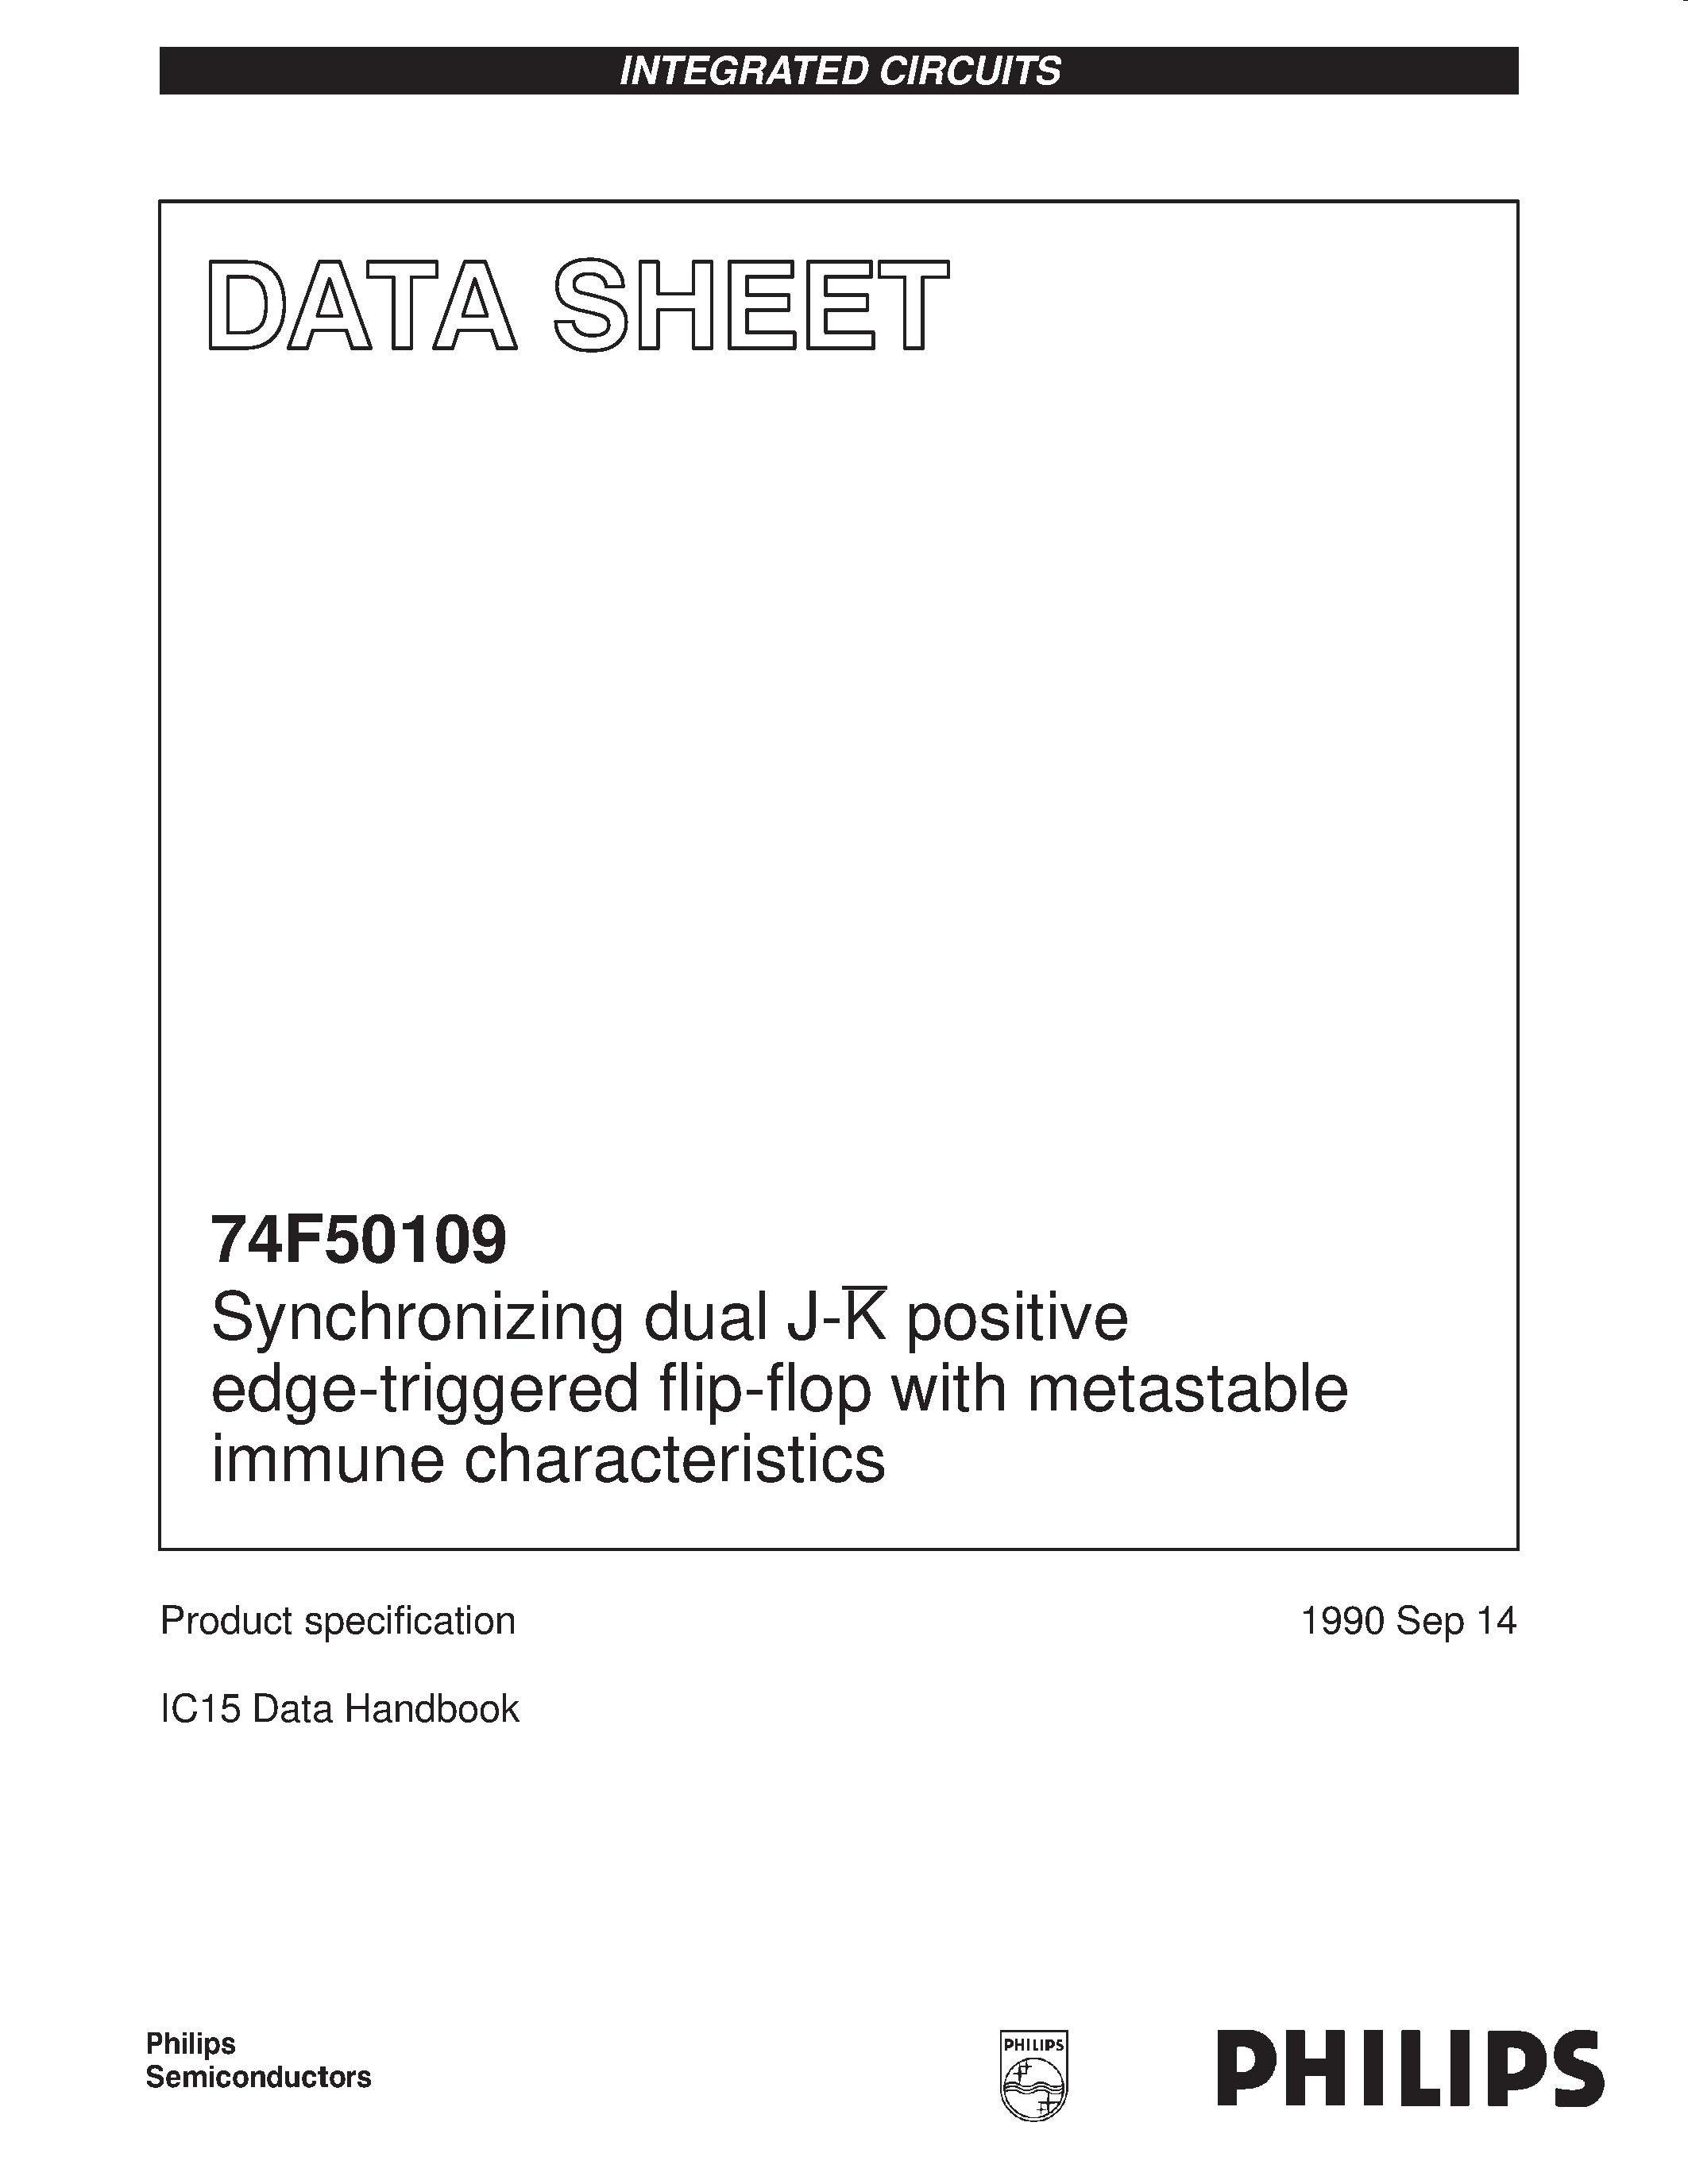 Datasheet N74F50109N - Synchronizing dual J-K positive edge-triggered flip-flop with metastable immune characteristics page 1